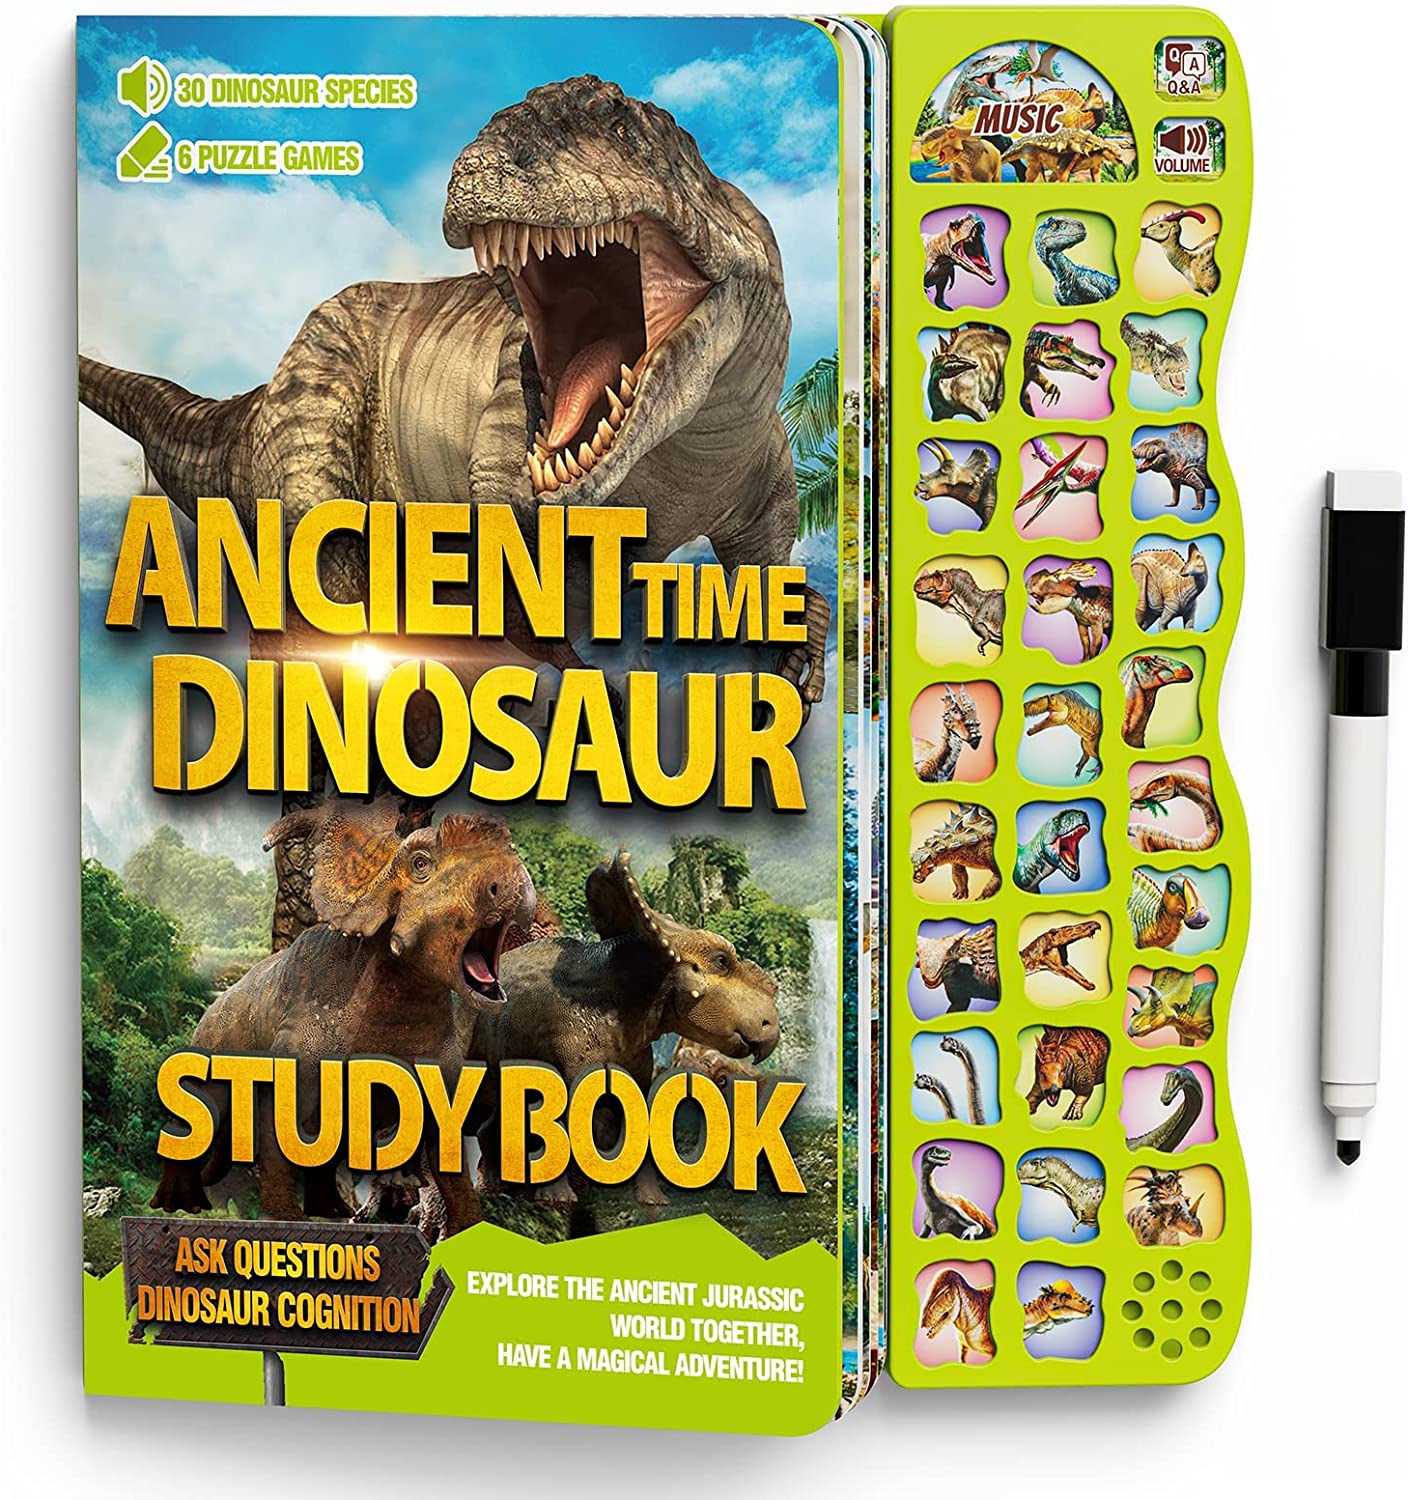 A King of Dinosaurs Button Sound Book Baby Kids English Study Song